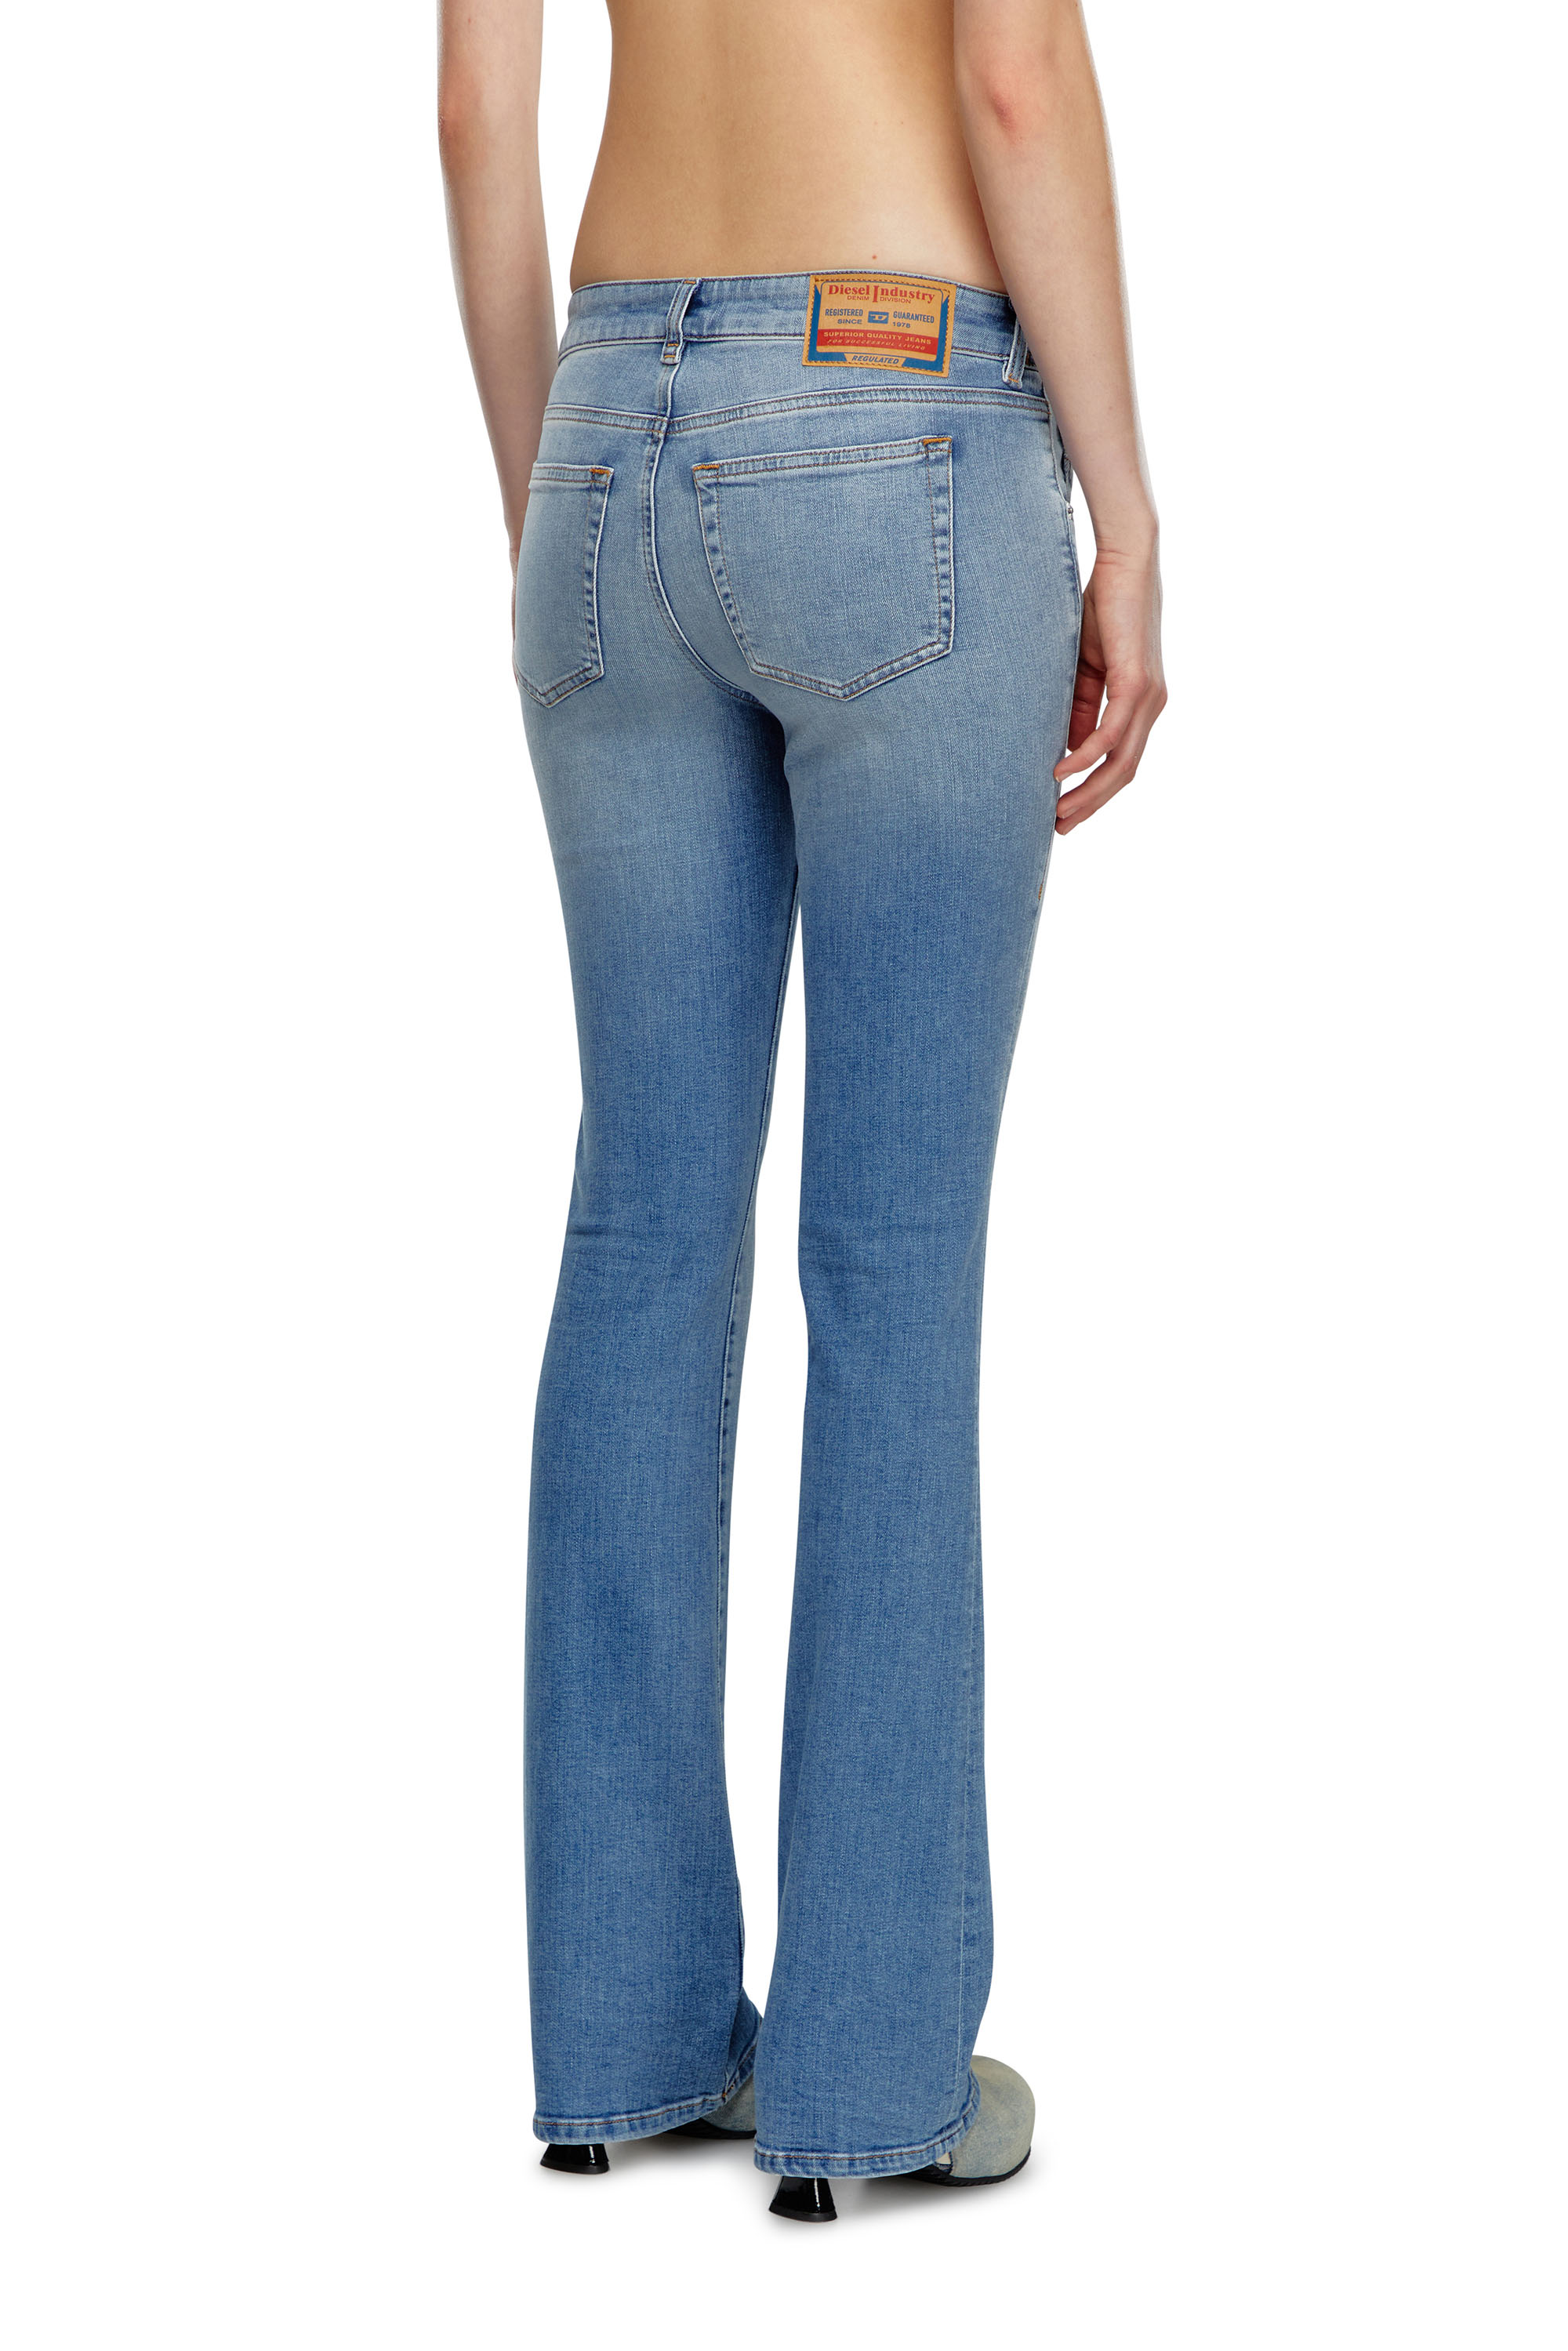 Diesel - Bootcut and Flare Jeans 1969 D-Ebbey 09K06, Mujer Bootcut y Flare Jeans - 1969 D-Ebbey in Azul marino - Image 3